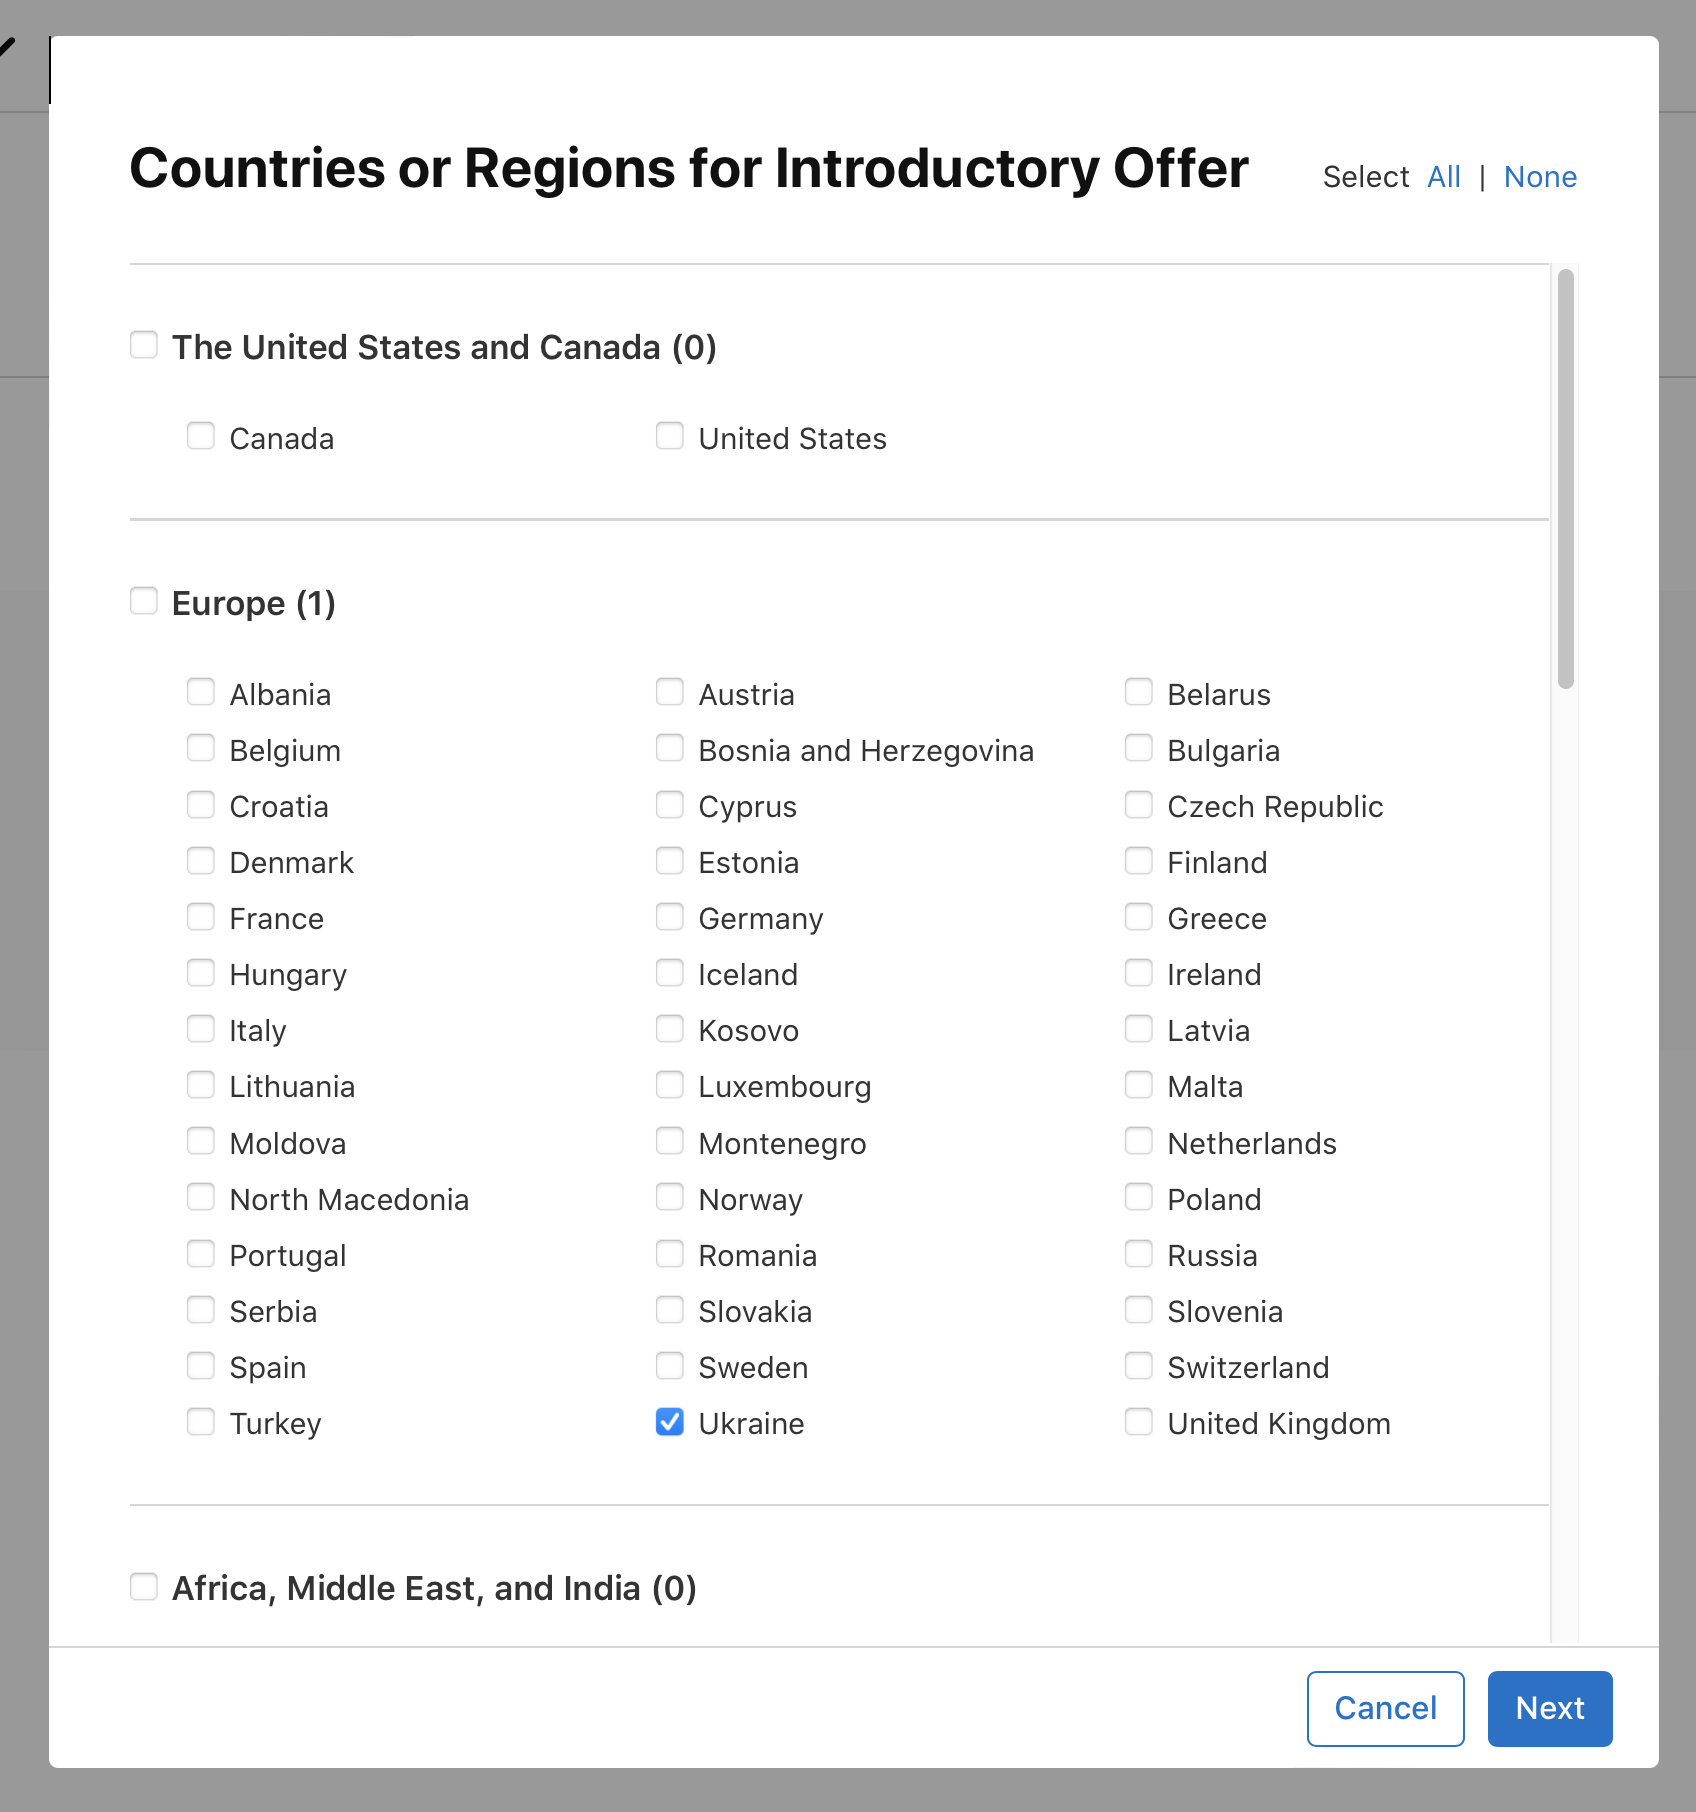 Countries or regions for introductory price